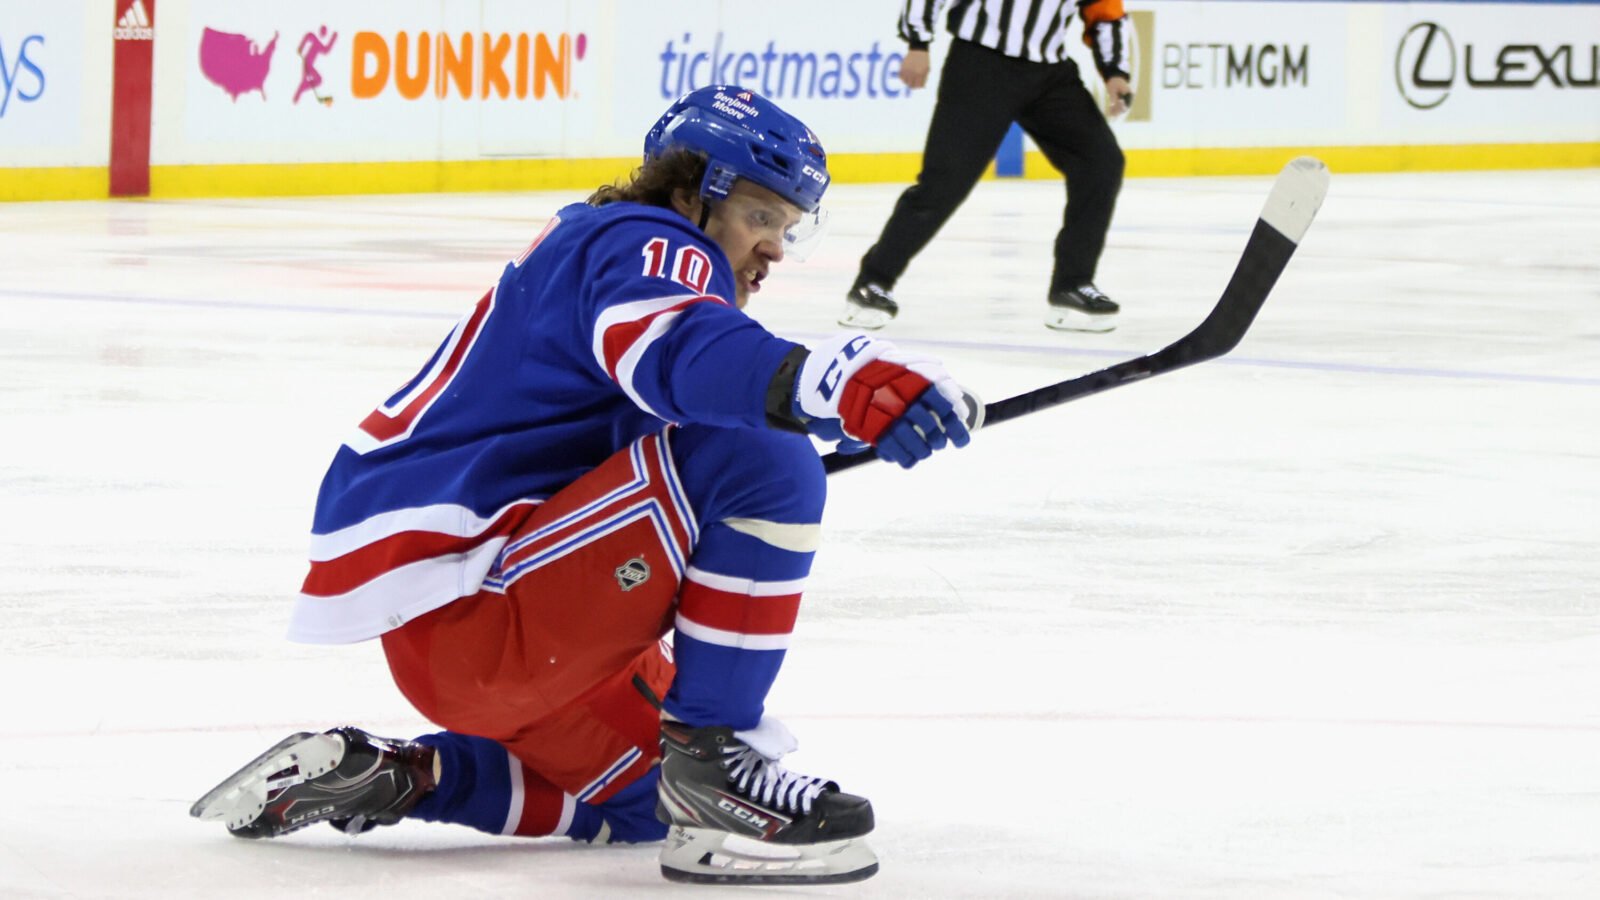 Panarin and Rangers complete comeback against Penguins